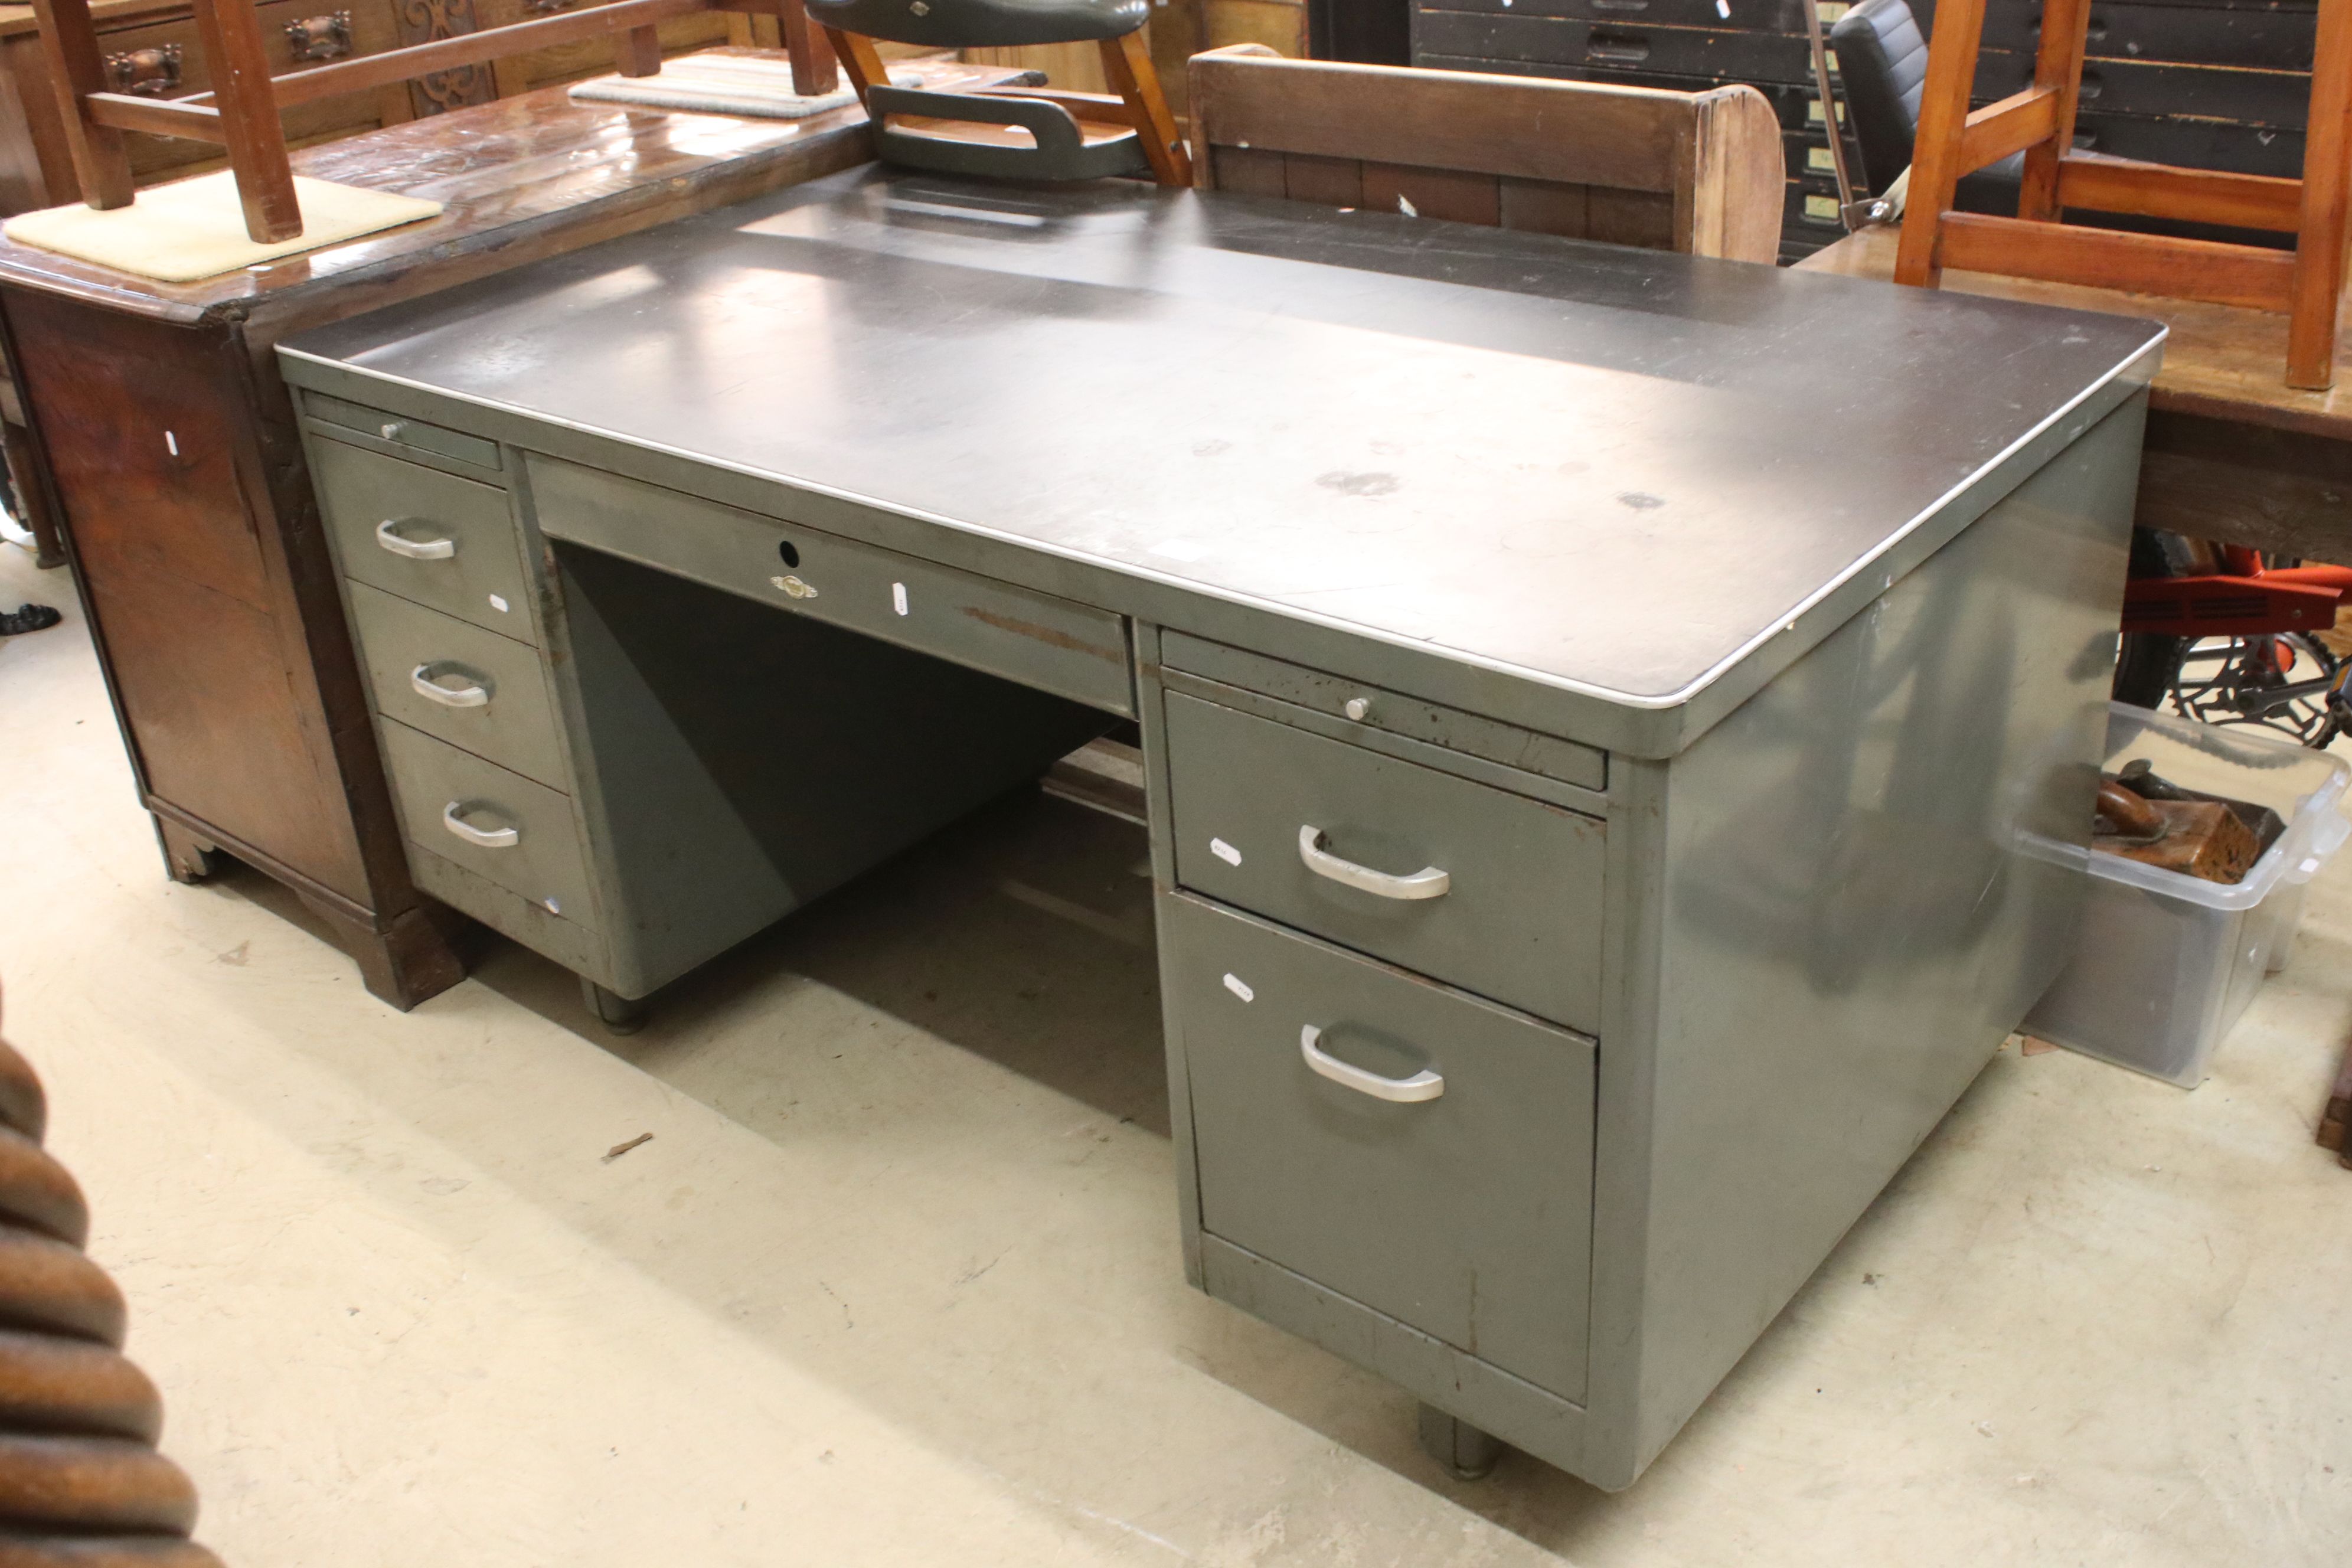 Mid 20th century Retro Industrial Metal Desk by Art Metal Company (London) comprising two slide